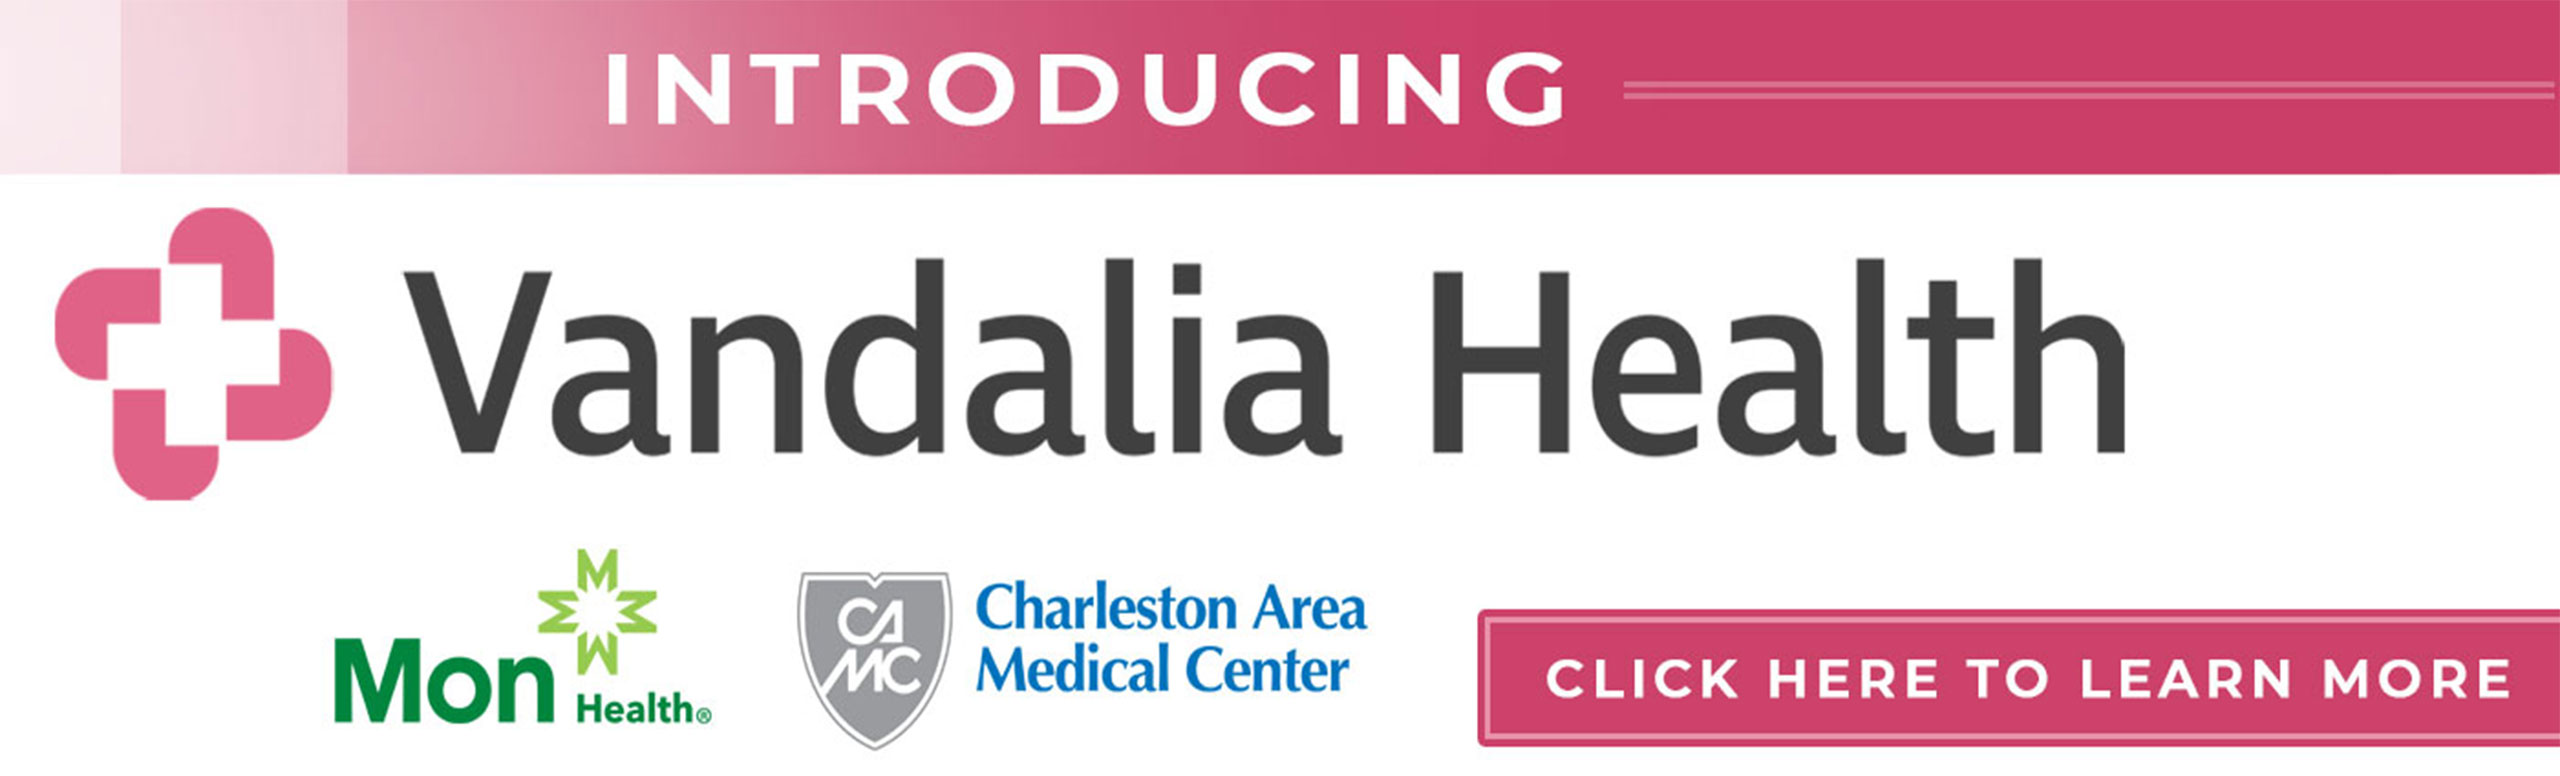 Banner that says:

INTRODUCING
Vandalia Health

Mon Health *
CAMC- Charleston Area Medical Center
(CLICK HERE TO LEARN MORE)